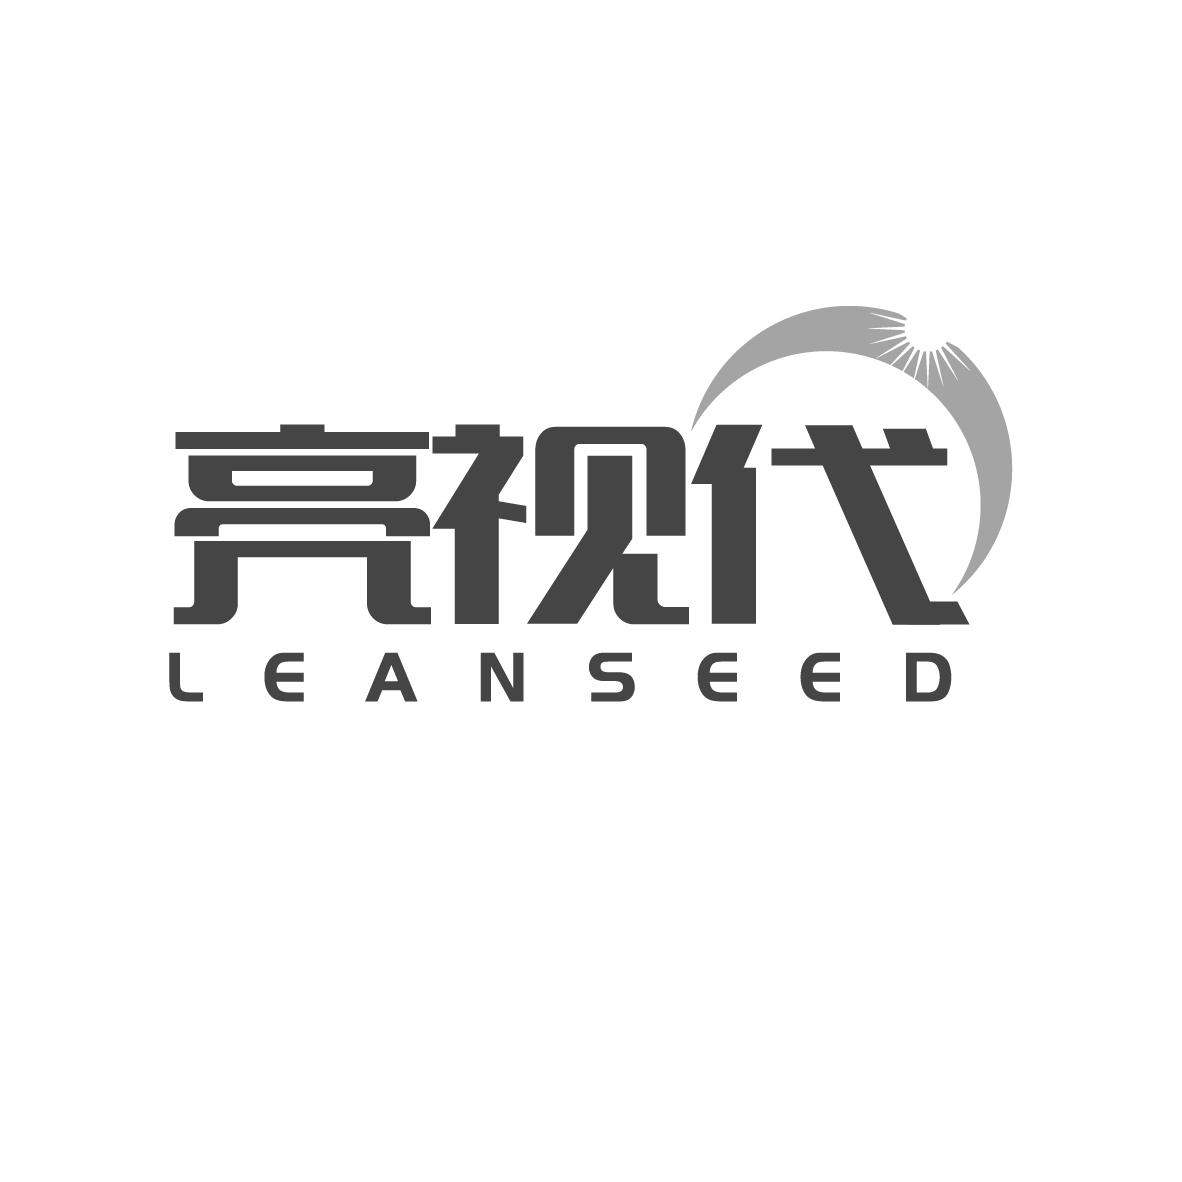 Ӵ LEANSEED